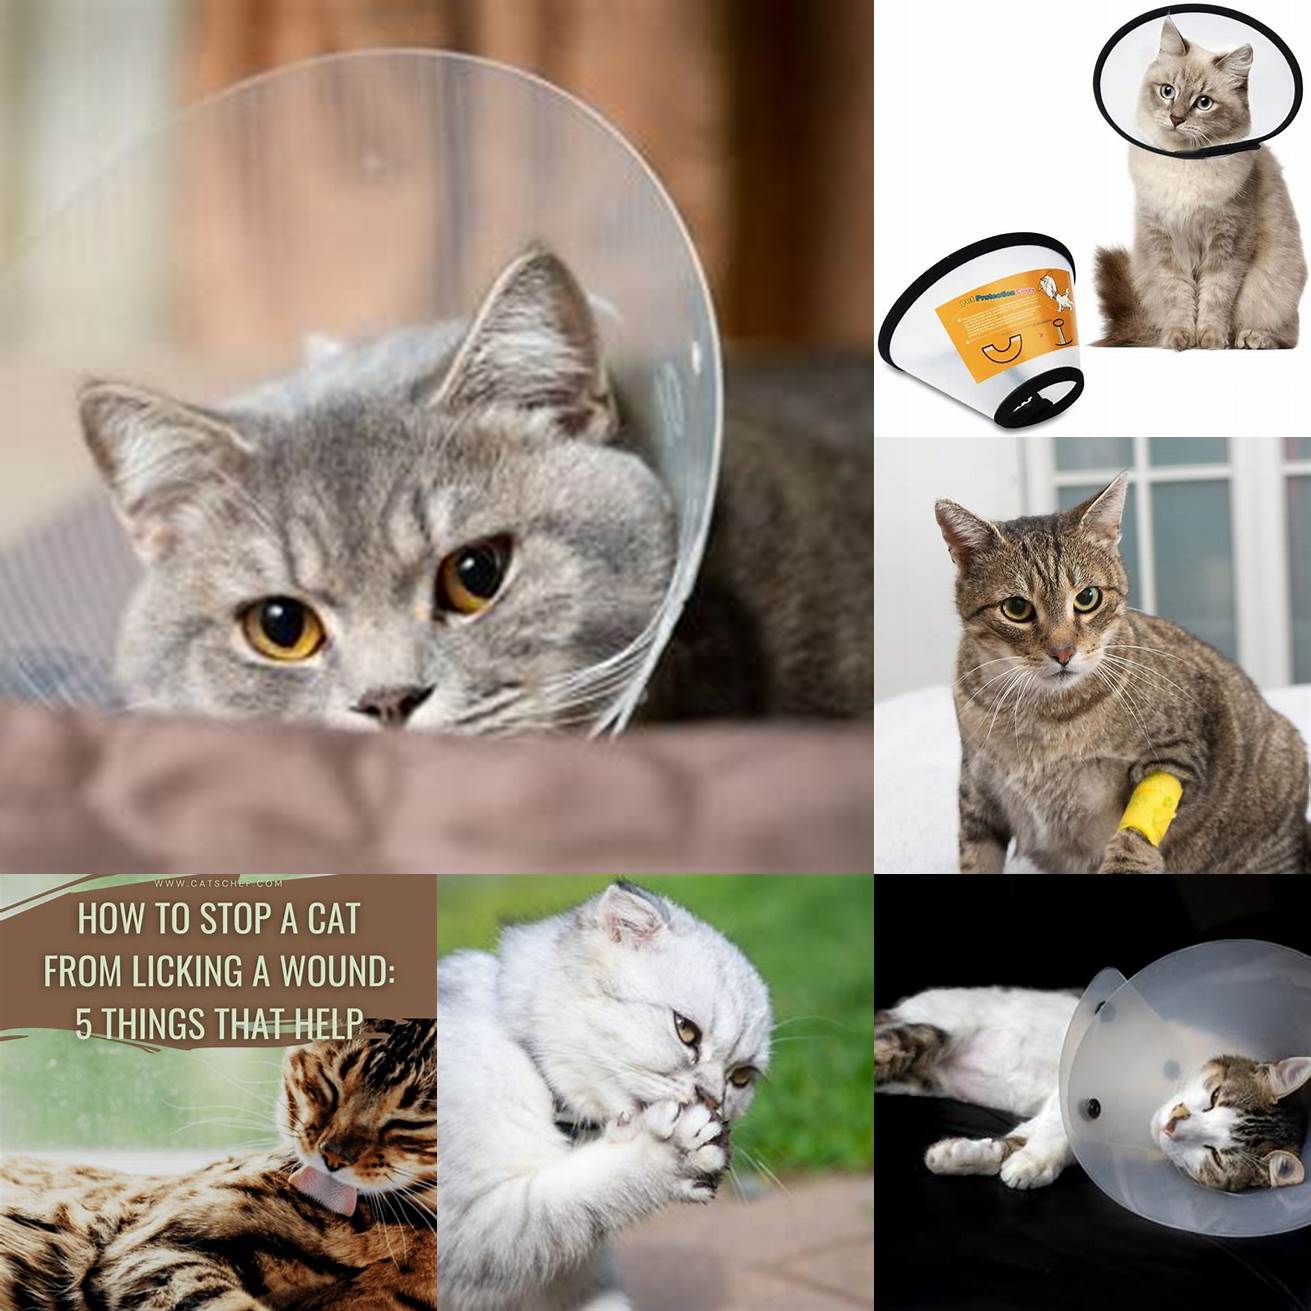 Prevent your cat from licking the wound